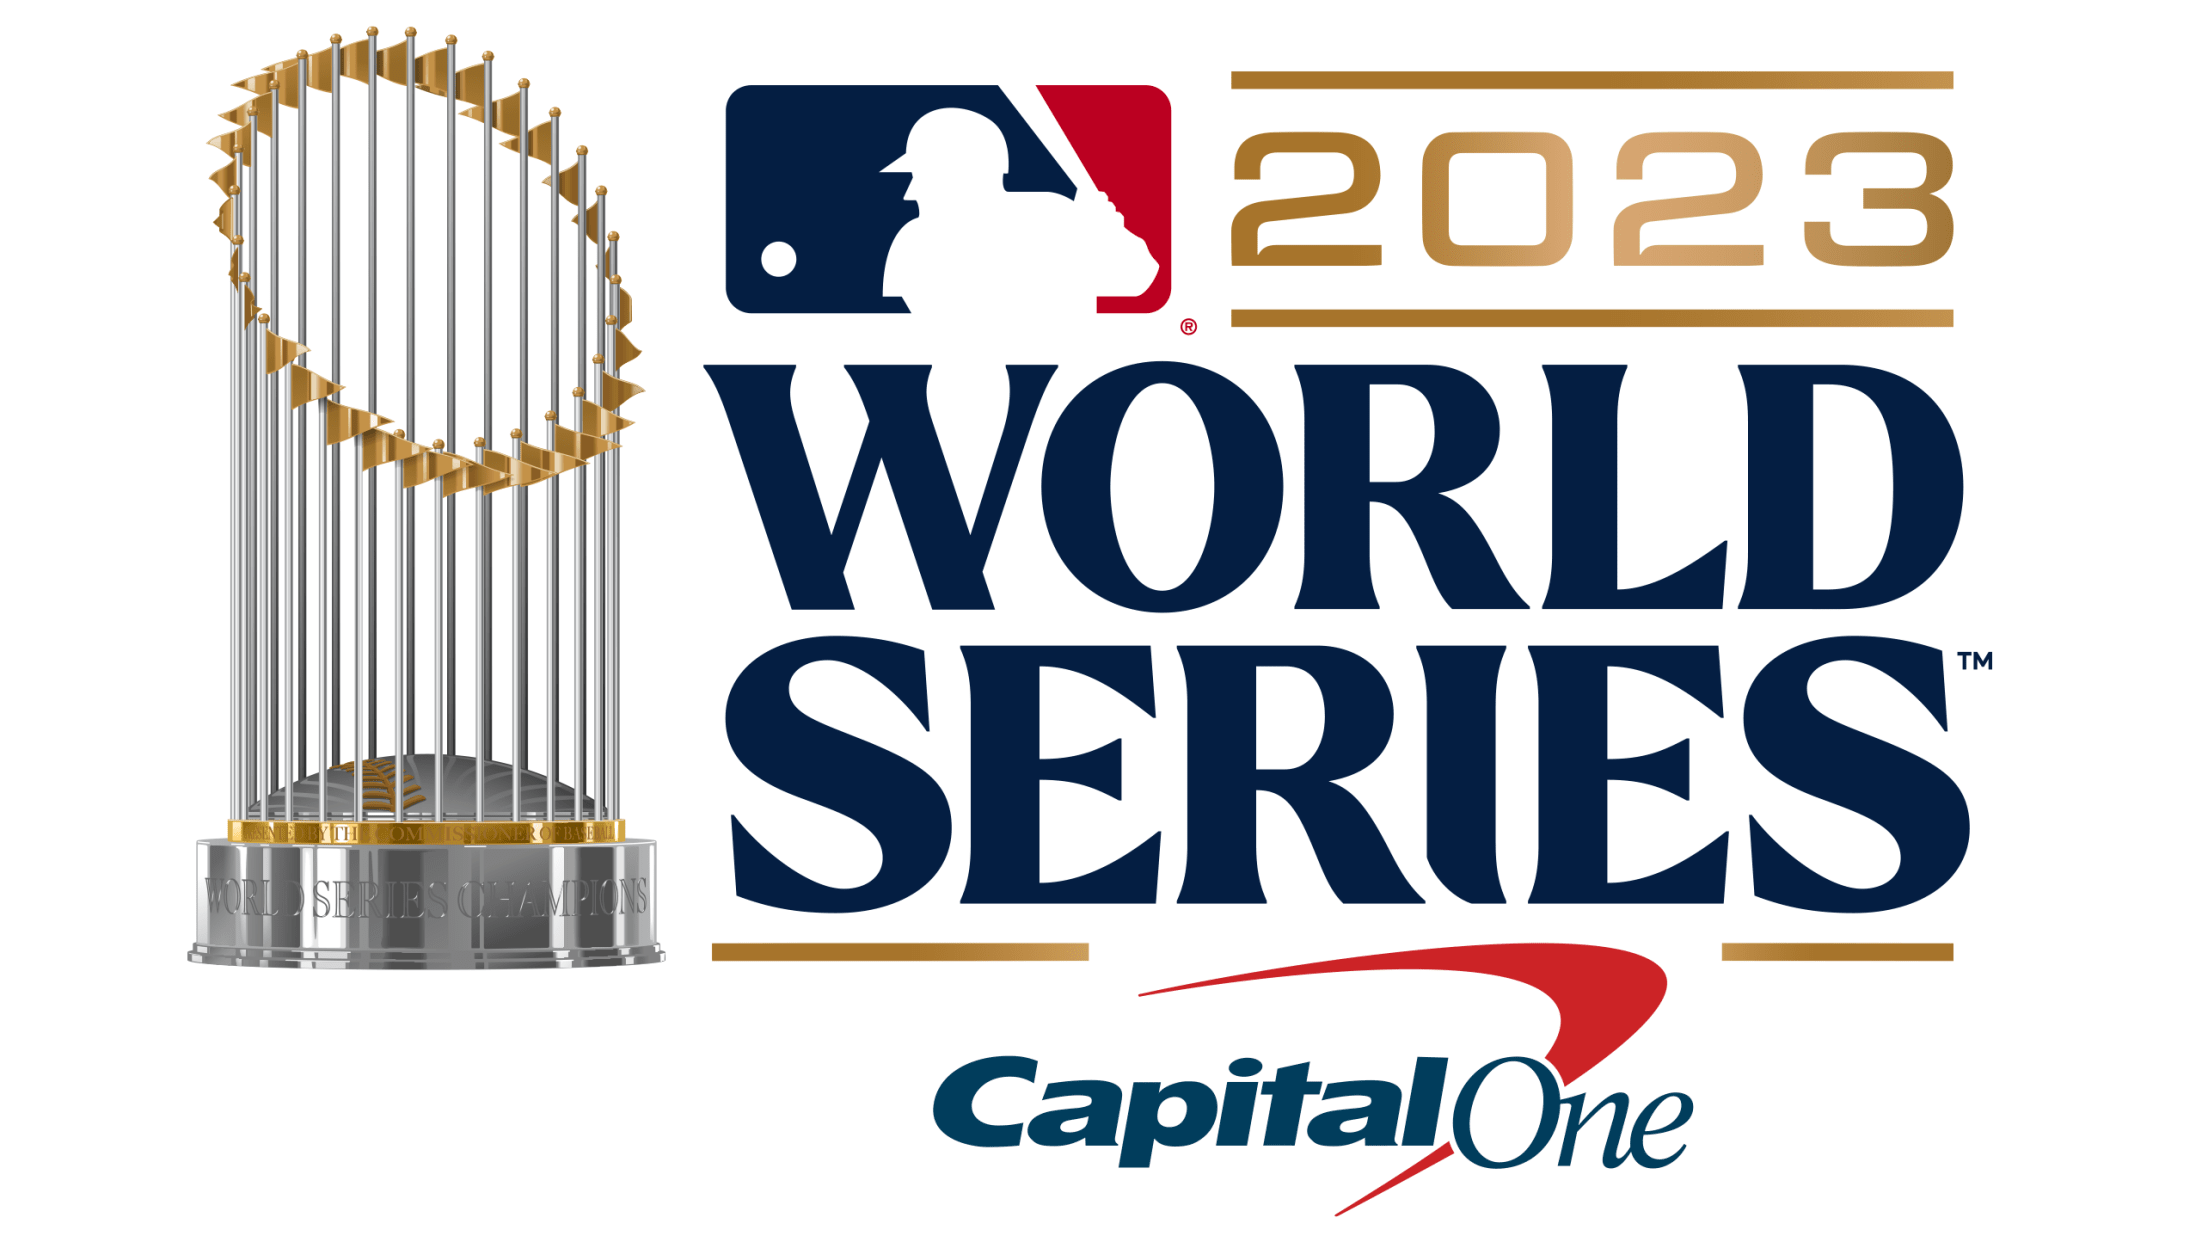 MLB Events: Draft, All-Star Game, World Series